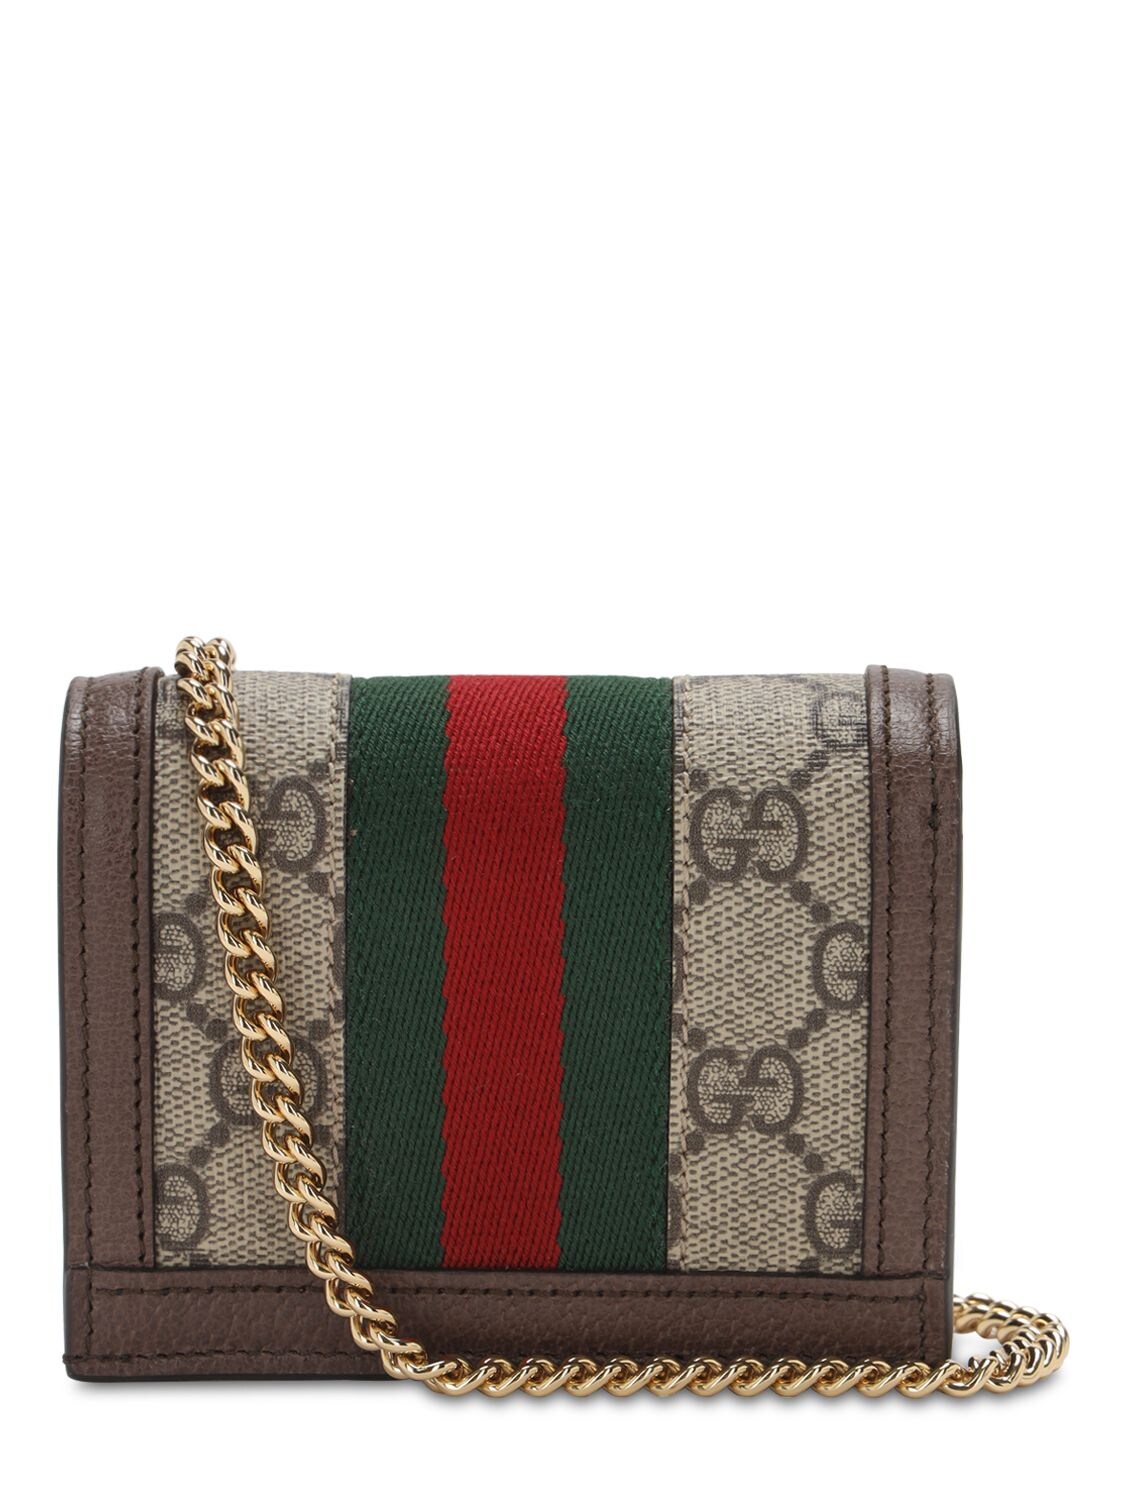 Gucci Ophidia Gg Supreme Web-stripe Canvas Wallet In Brown | ModeSens